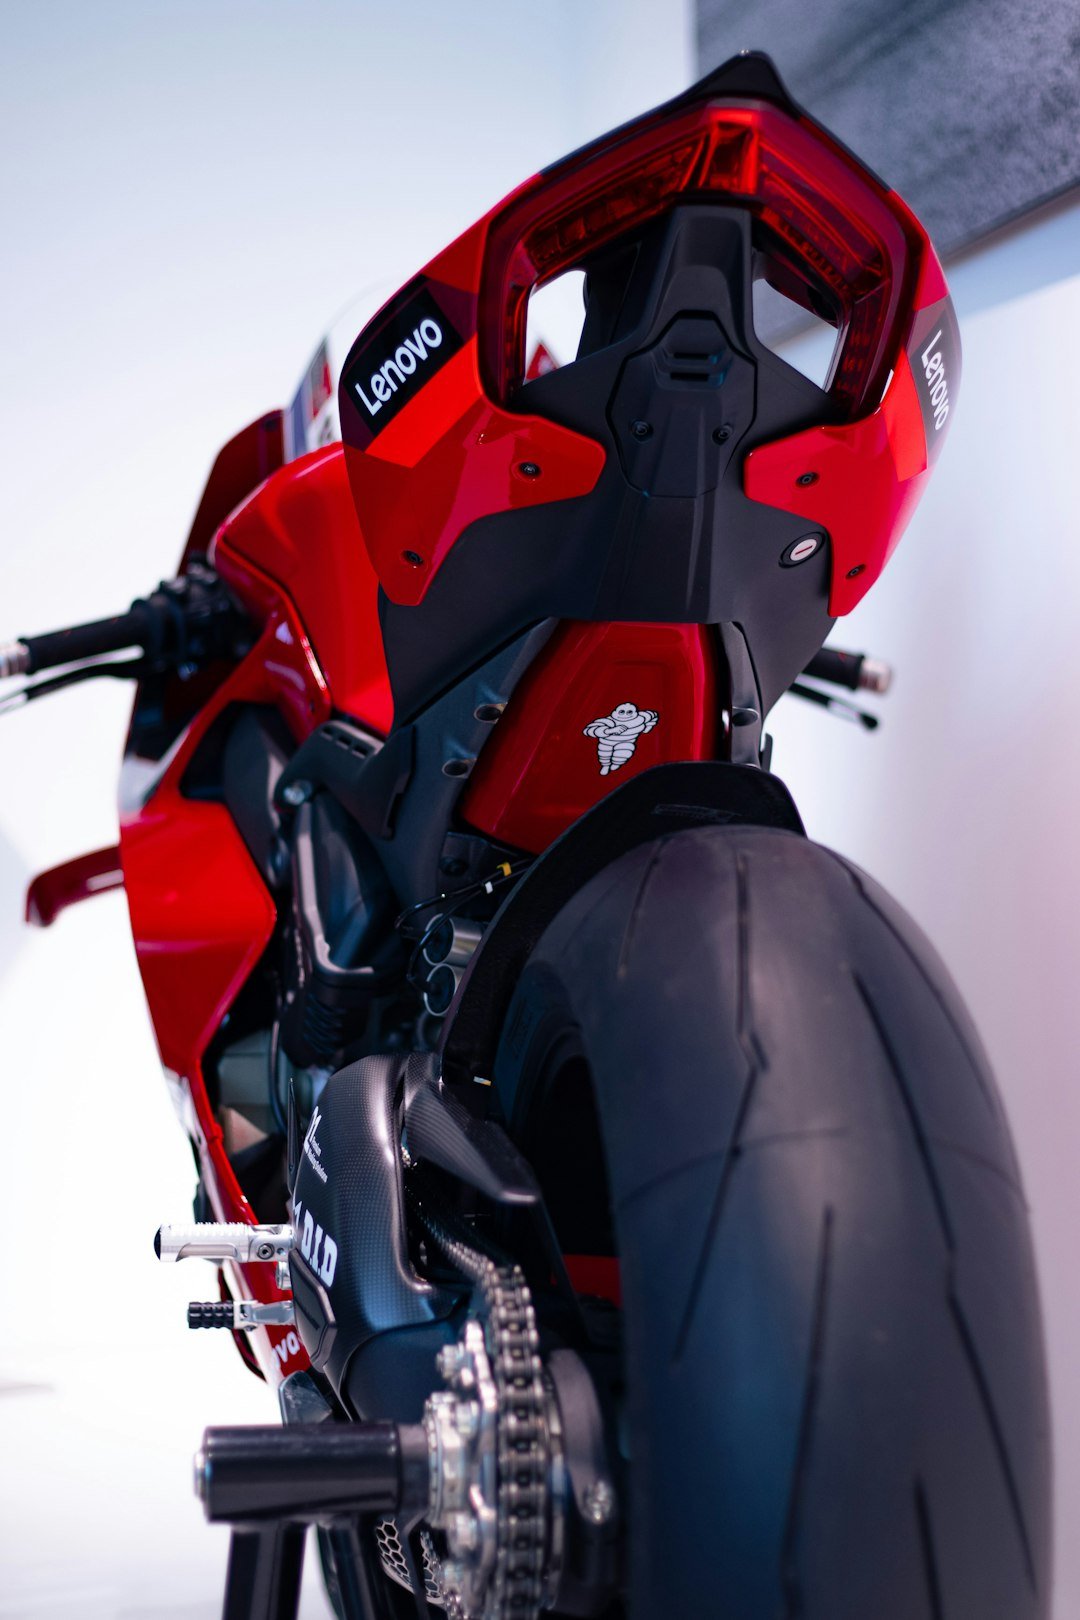 a close up of a red and black motorcycle